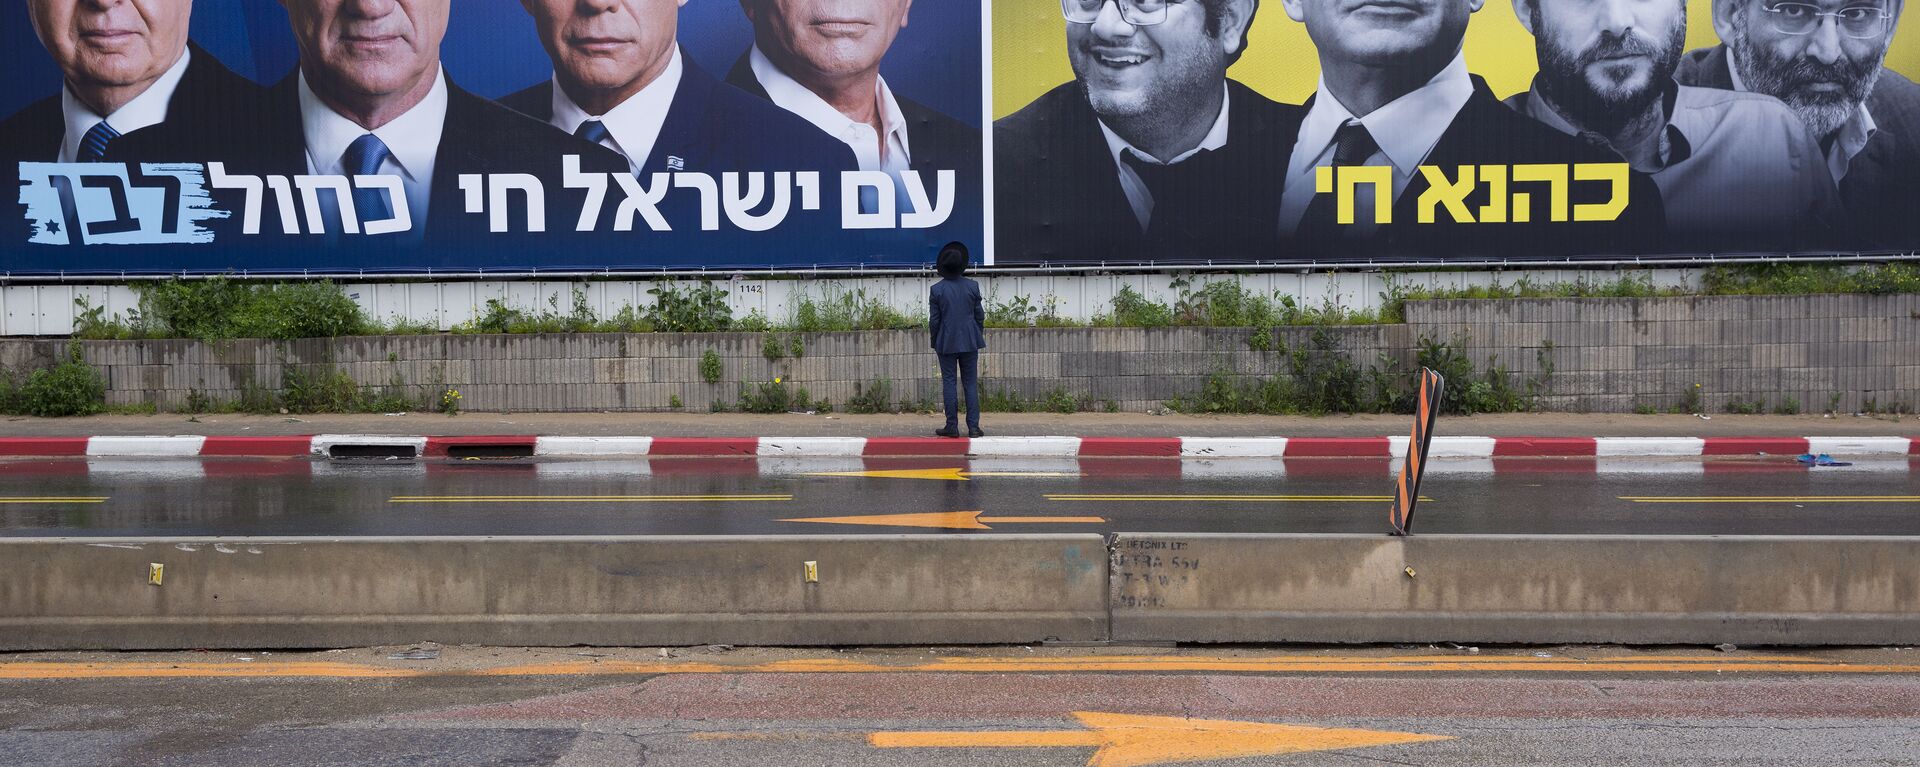 An Ultra-Orthodox Jewish man looks at an elections billboards of the Blue and White party leaders, from left to right, Moshe Yaalon, Benny Gantz, Yair Lapid and Gabi Ashkenazi, alongside a panel on the right showing Prime Minister Benjamin Netanyahu flanked by extreme right politicians, from the left, Itamar Ben Gvir, Bezalel Smotrich and Michael Ben Ari in Bnei Brak, Israel, Saturday, March 16, 2019. Hebrew reads on the left billboard The nation of Israel lives and on the right billboard Kahana Lives in a reference to a banned ultranationalist party in the 1994. - Sputnik International, 1920, 08.01.2021